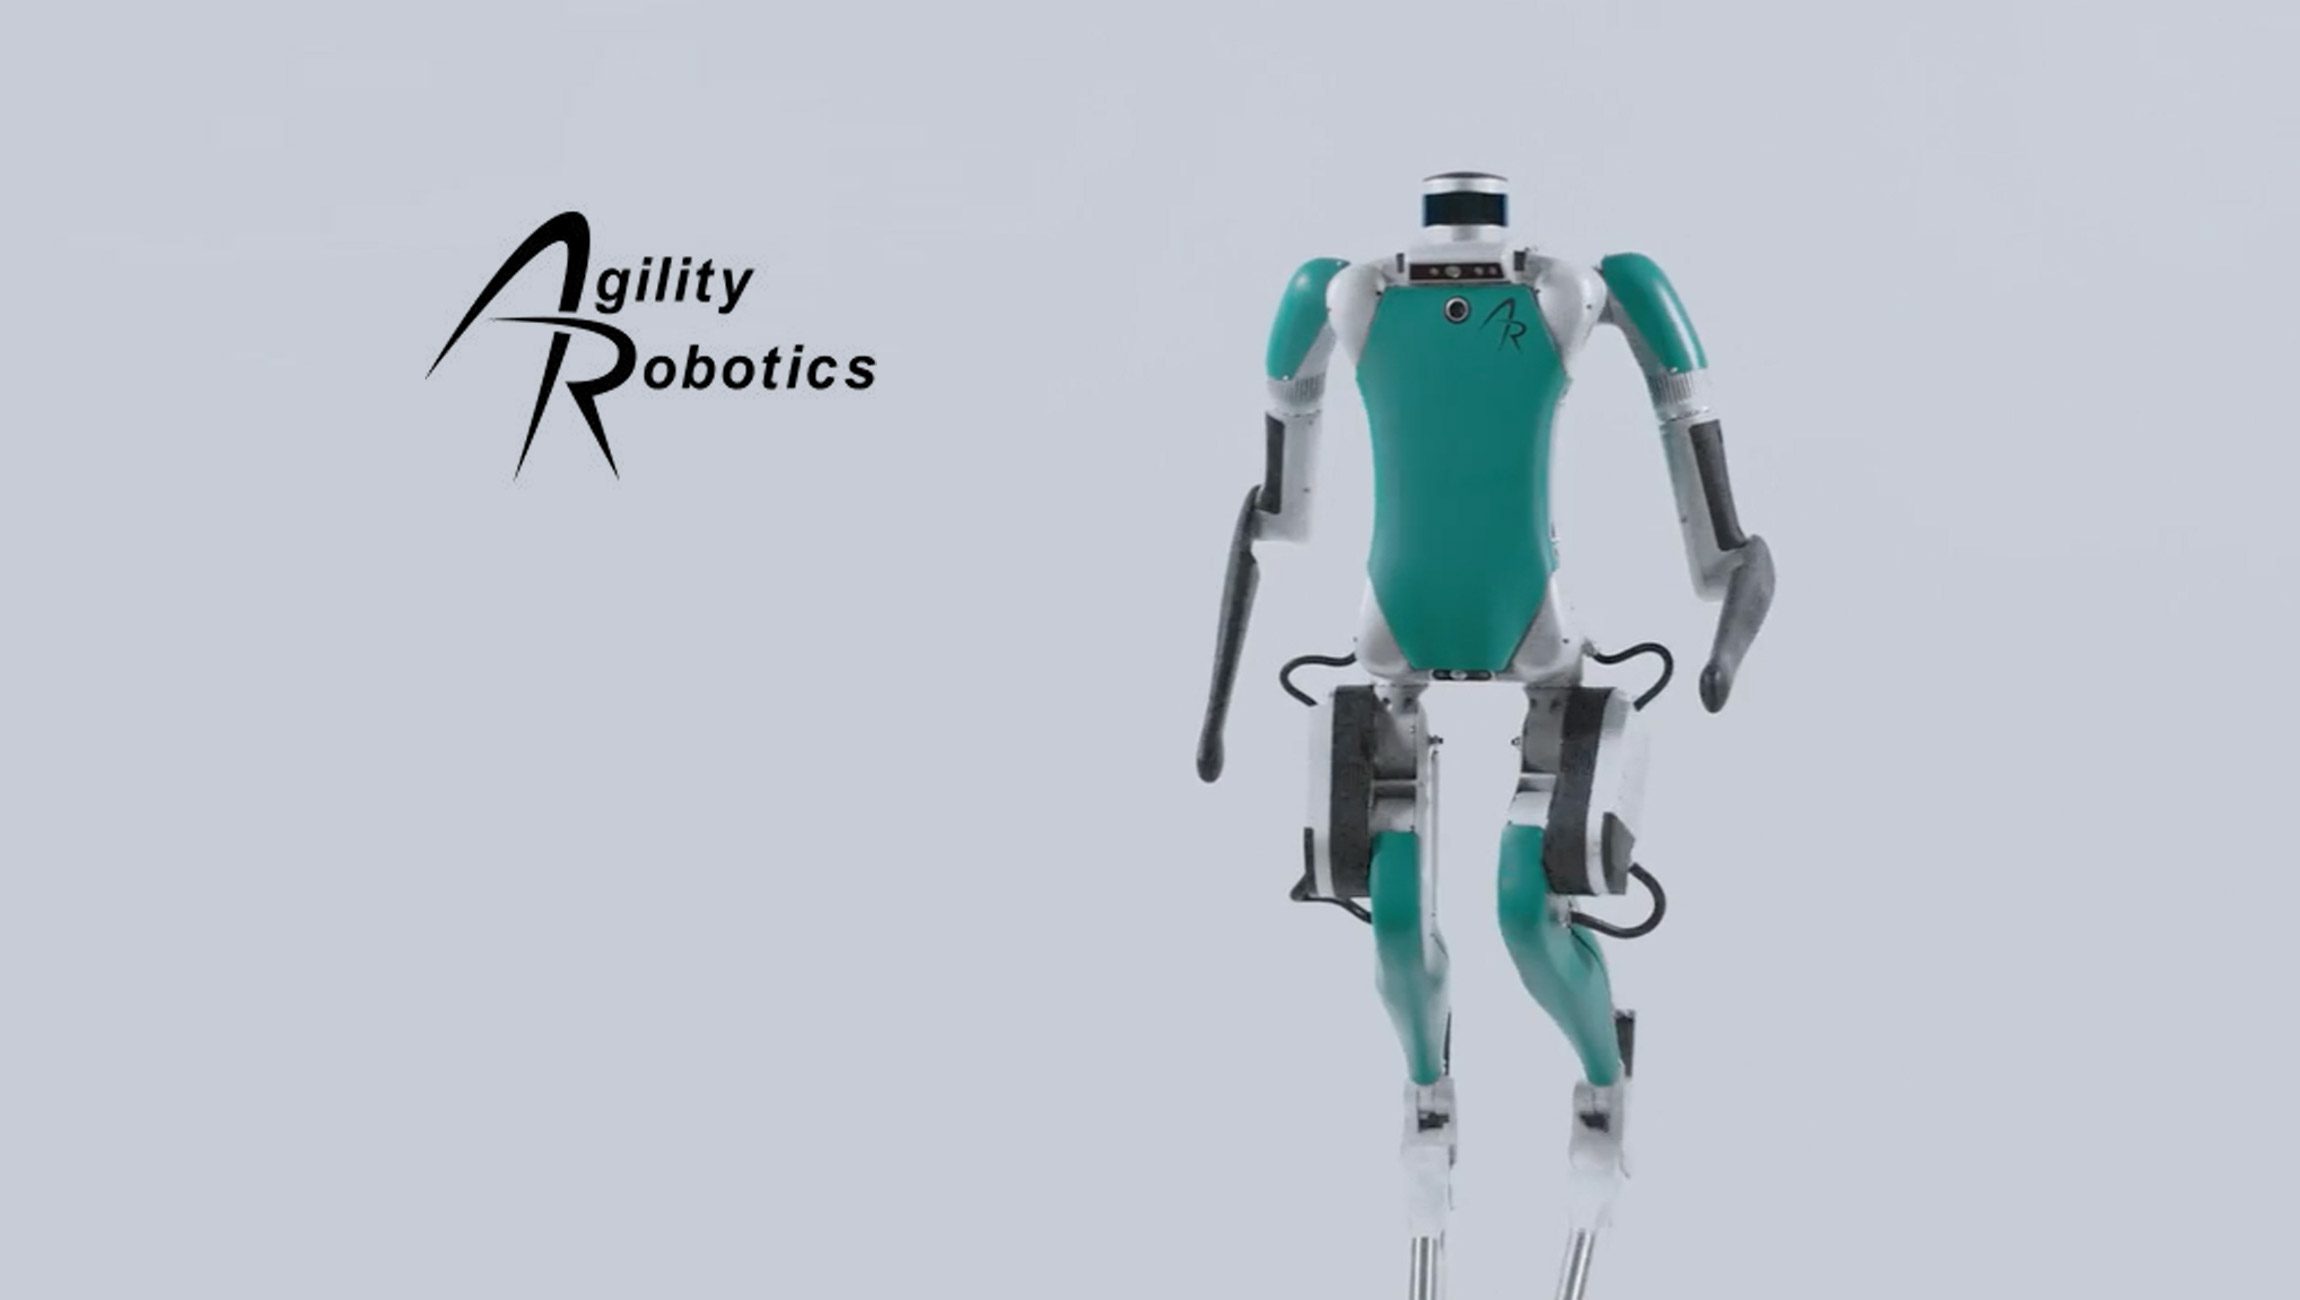 Agility Robotics Raises $150M Series B Led by DCVC and Playground Global to Accelerate Blended Human-Robot Workplaces